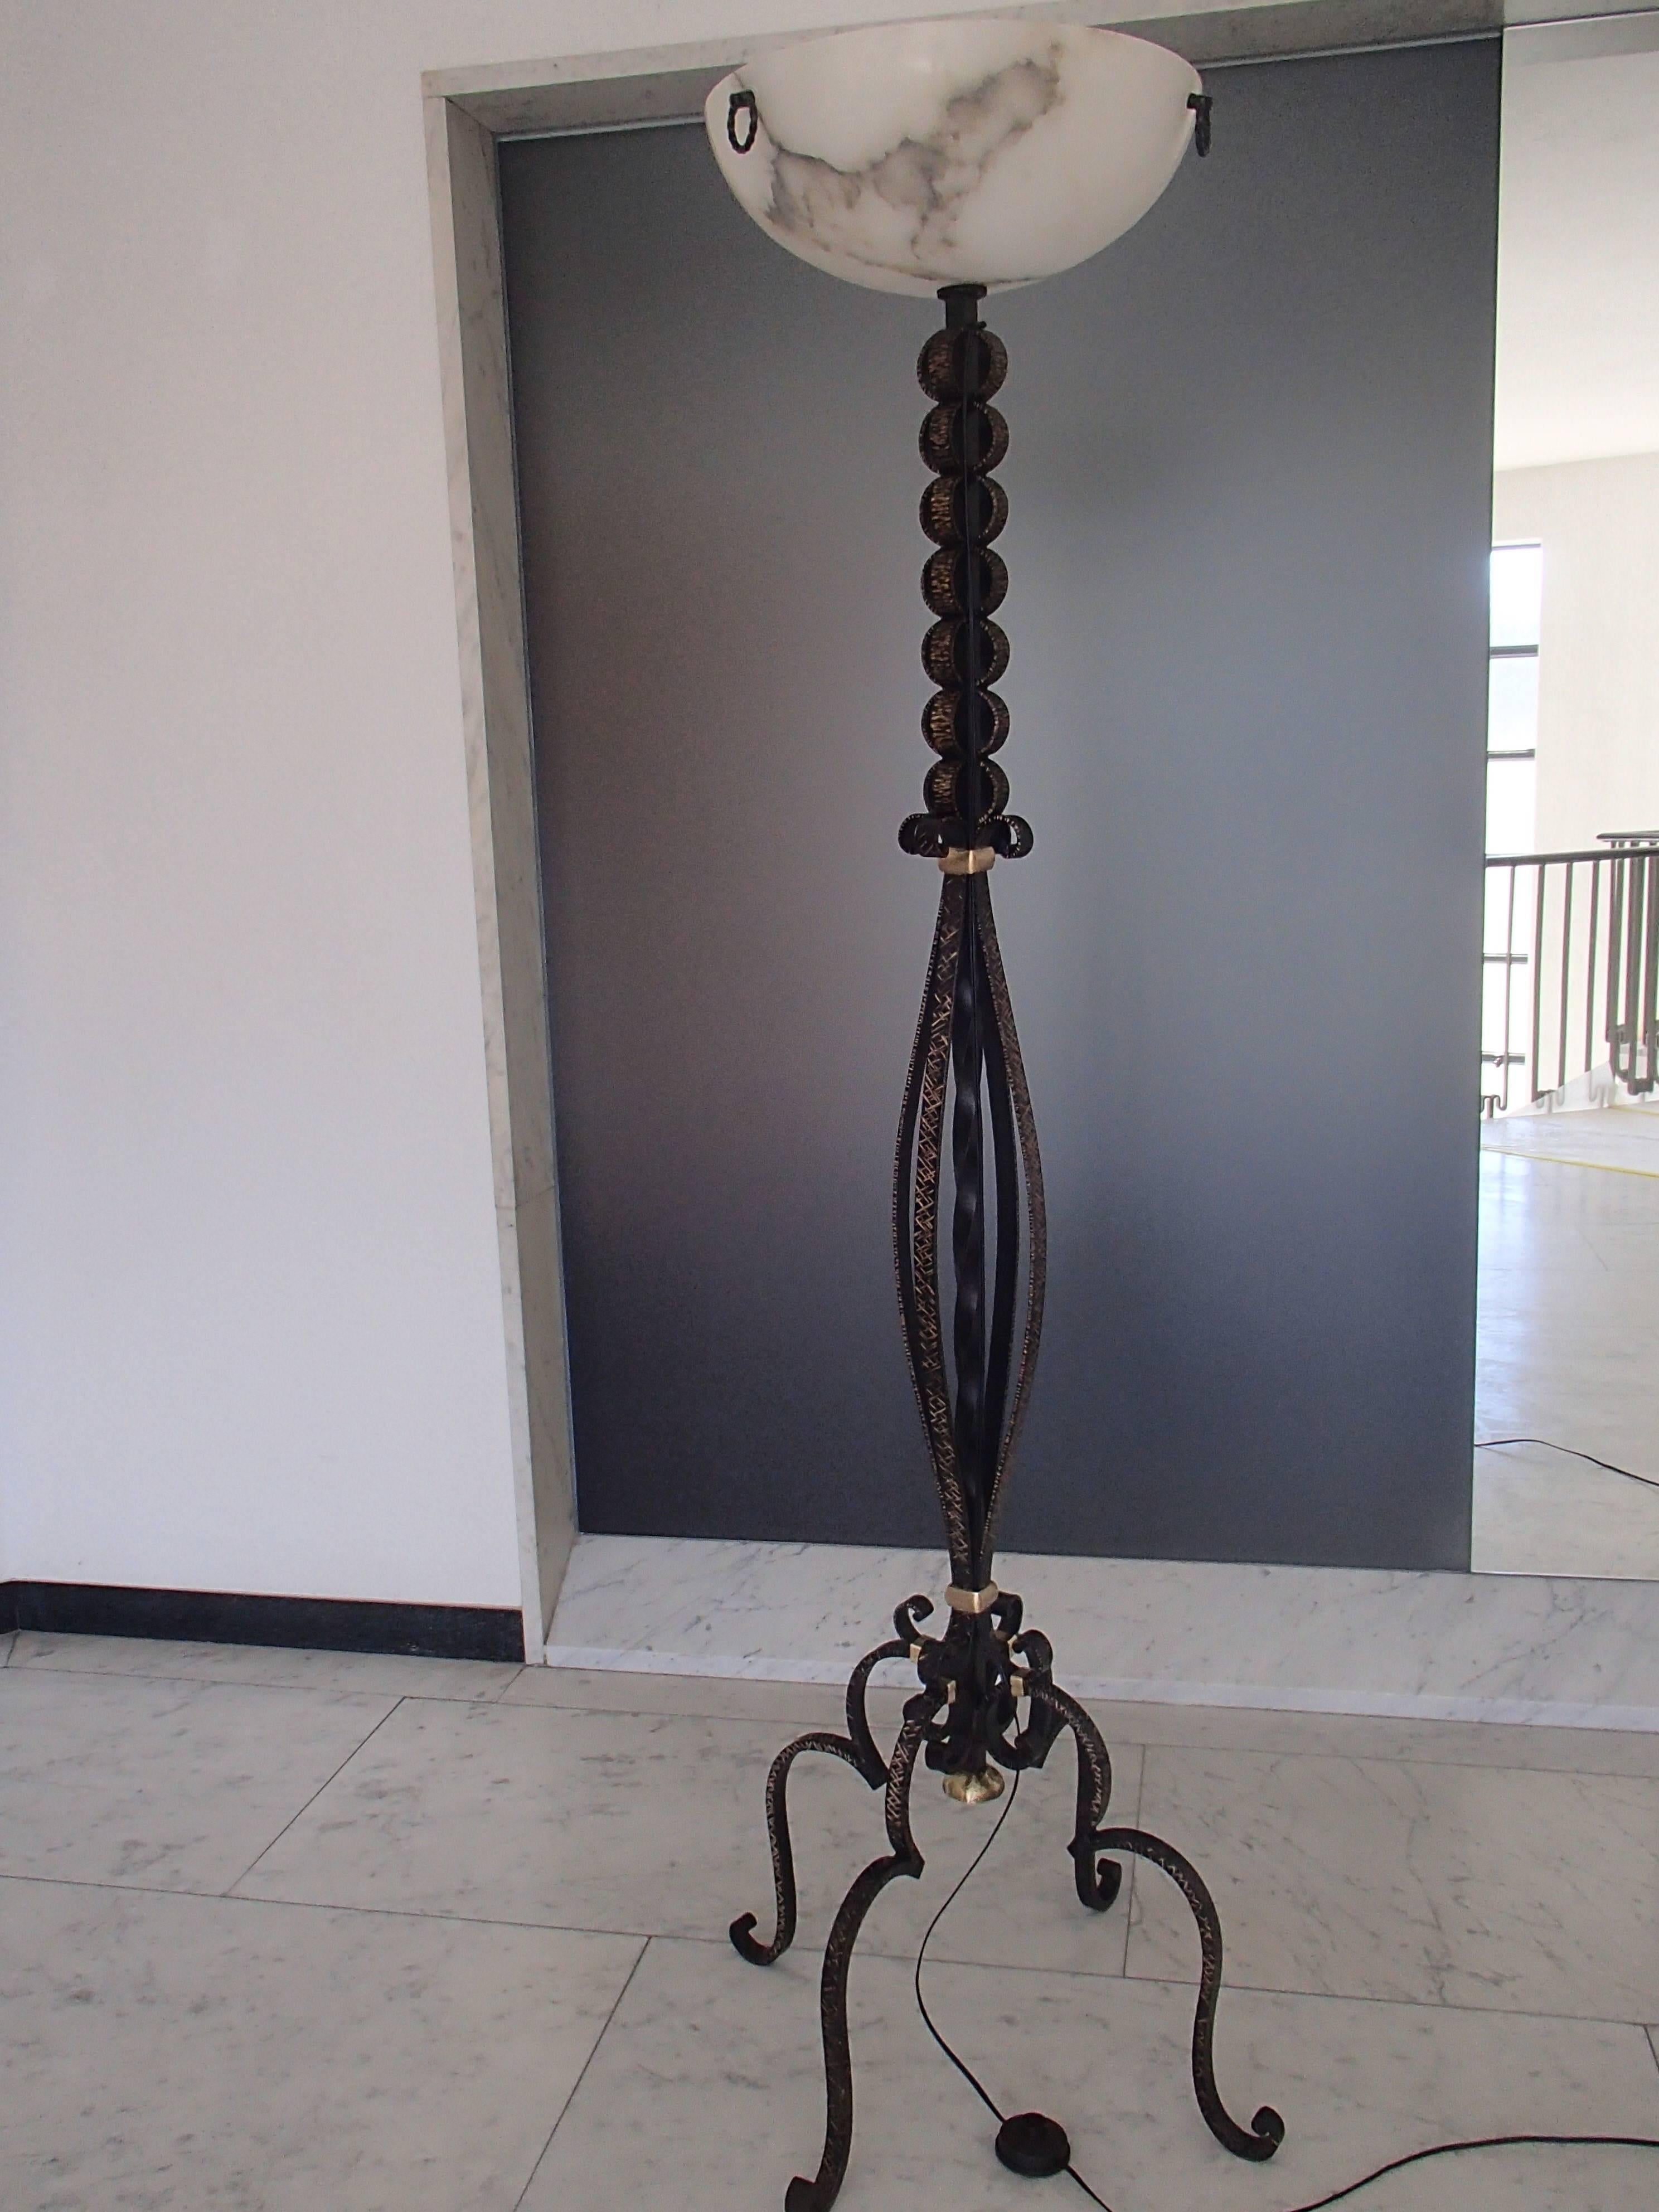 Decorative wrought iron floor lamp with brass elements and alabaster shade.